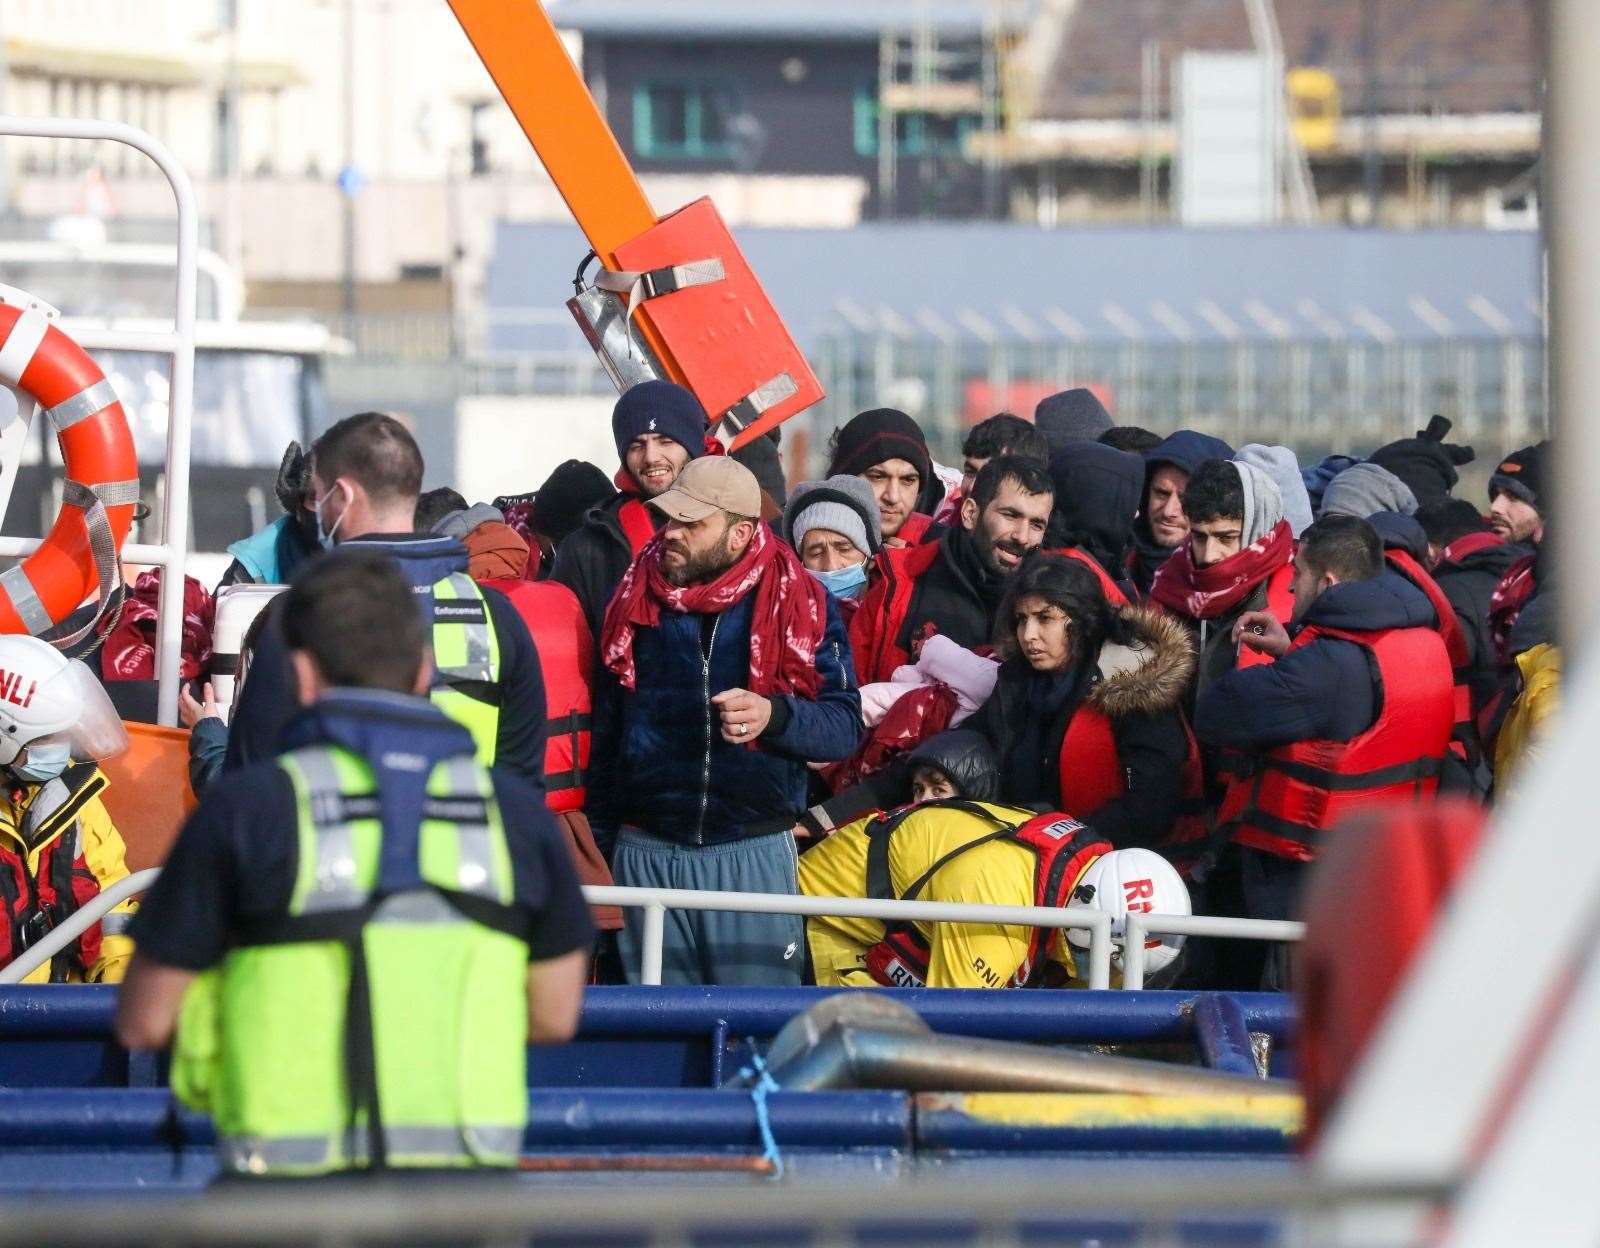 The asylum seekers, with the baby shown in the middle of the group, at the Tug Haven. Picture: UKNIP